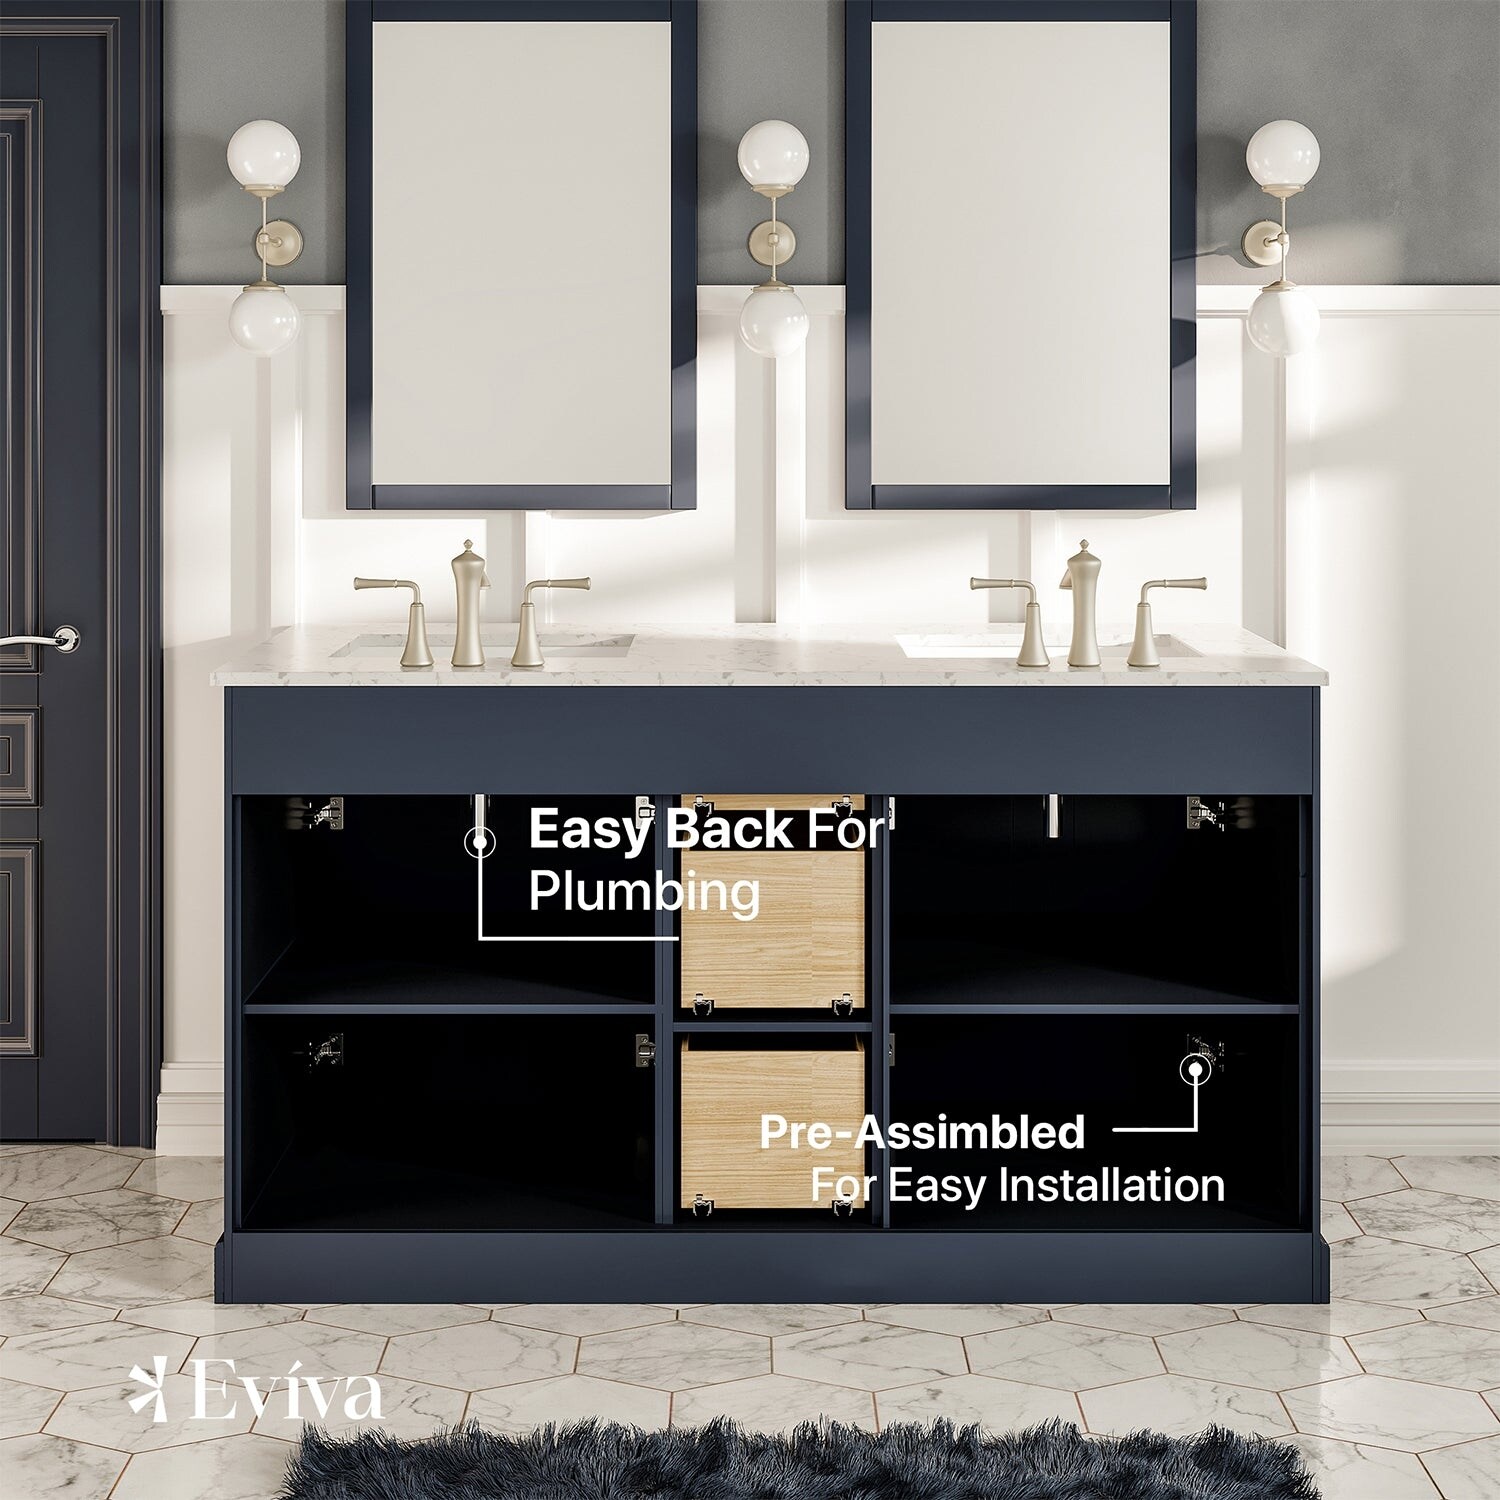 https://ak1.ostkcdn.com/images/products/is/images/direct/2e89db7cdd7e6a788cc872d24b133af46056bfc1/Eviva-Epic-60-Inch-Transitional-Modern-Charcoal-Grey-Bathroom-Vanity.jpg